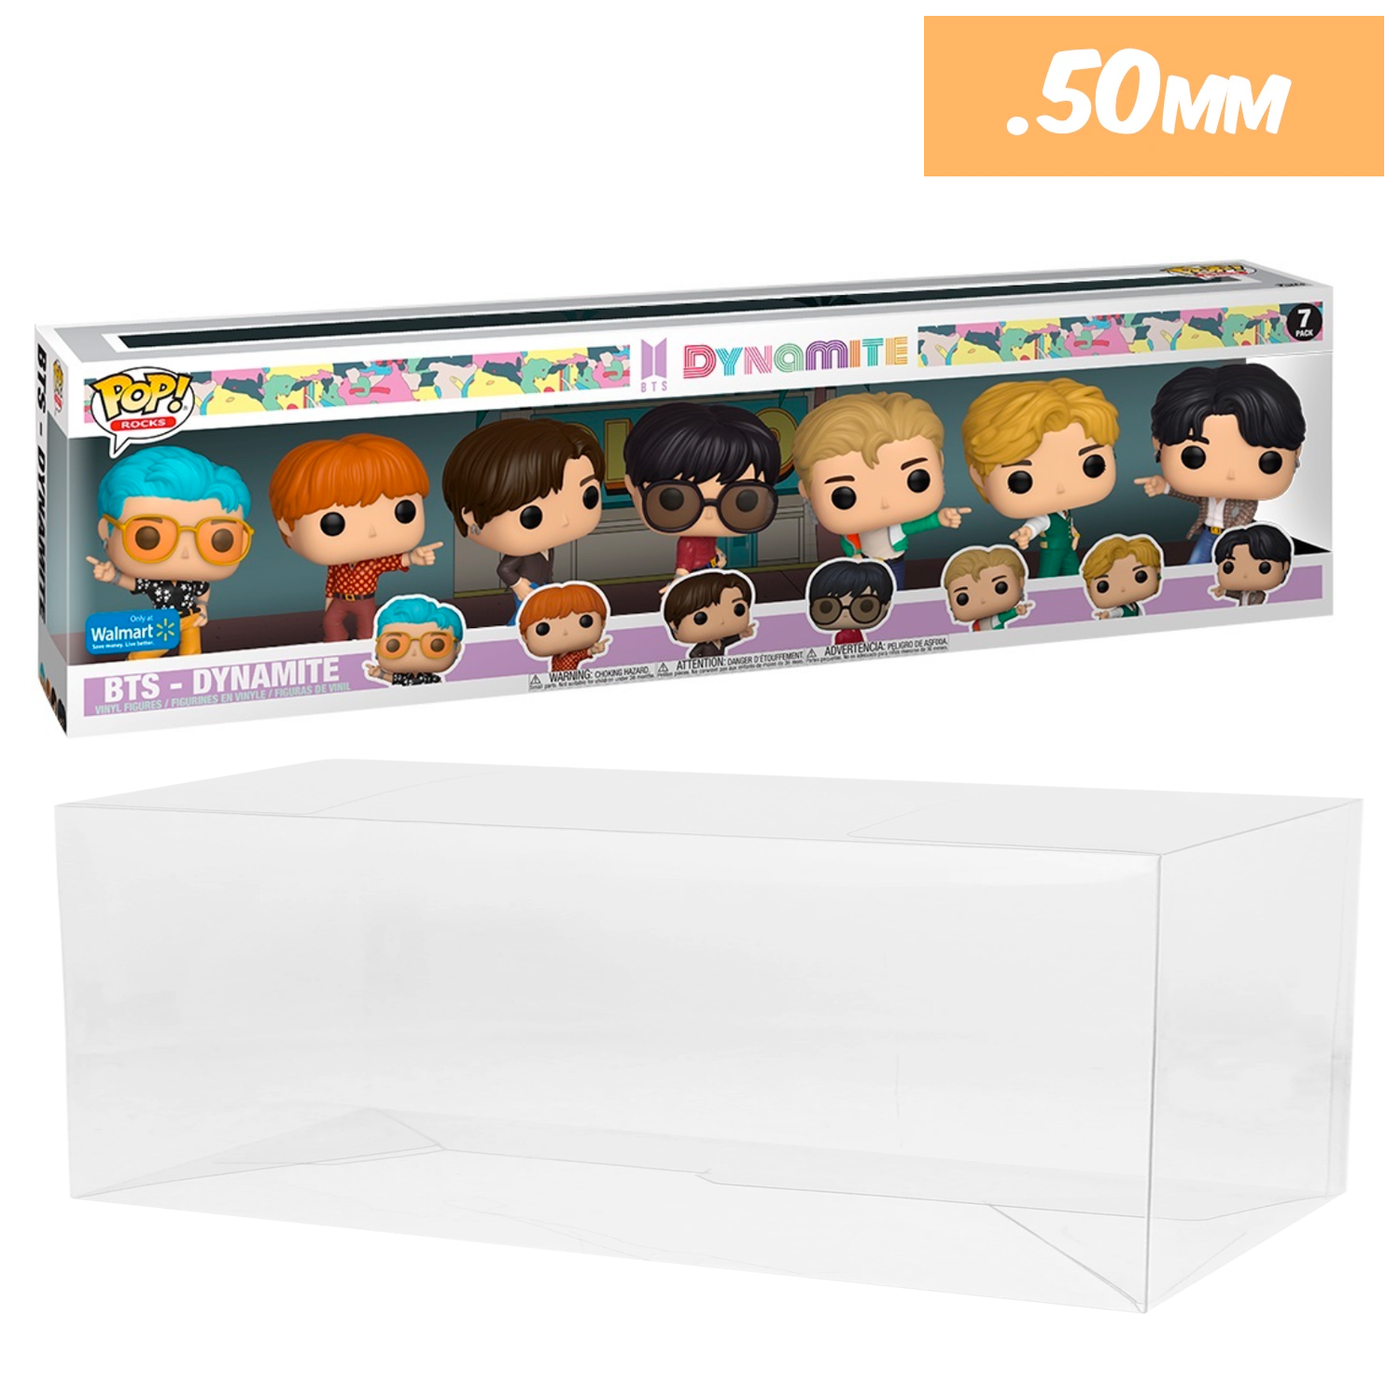 walmart bts dynamite 7 pack best funko pop protectors thick strong uv scratch flat top stack vinyl display geek plastic shield vaulted eco armor fits collect protect display case kollector protector